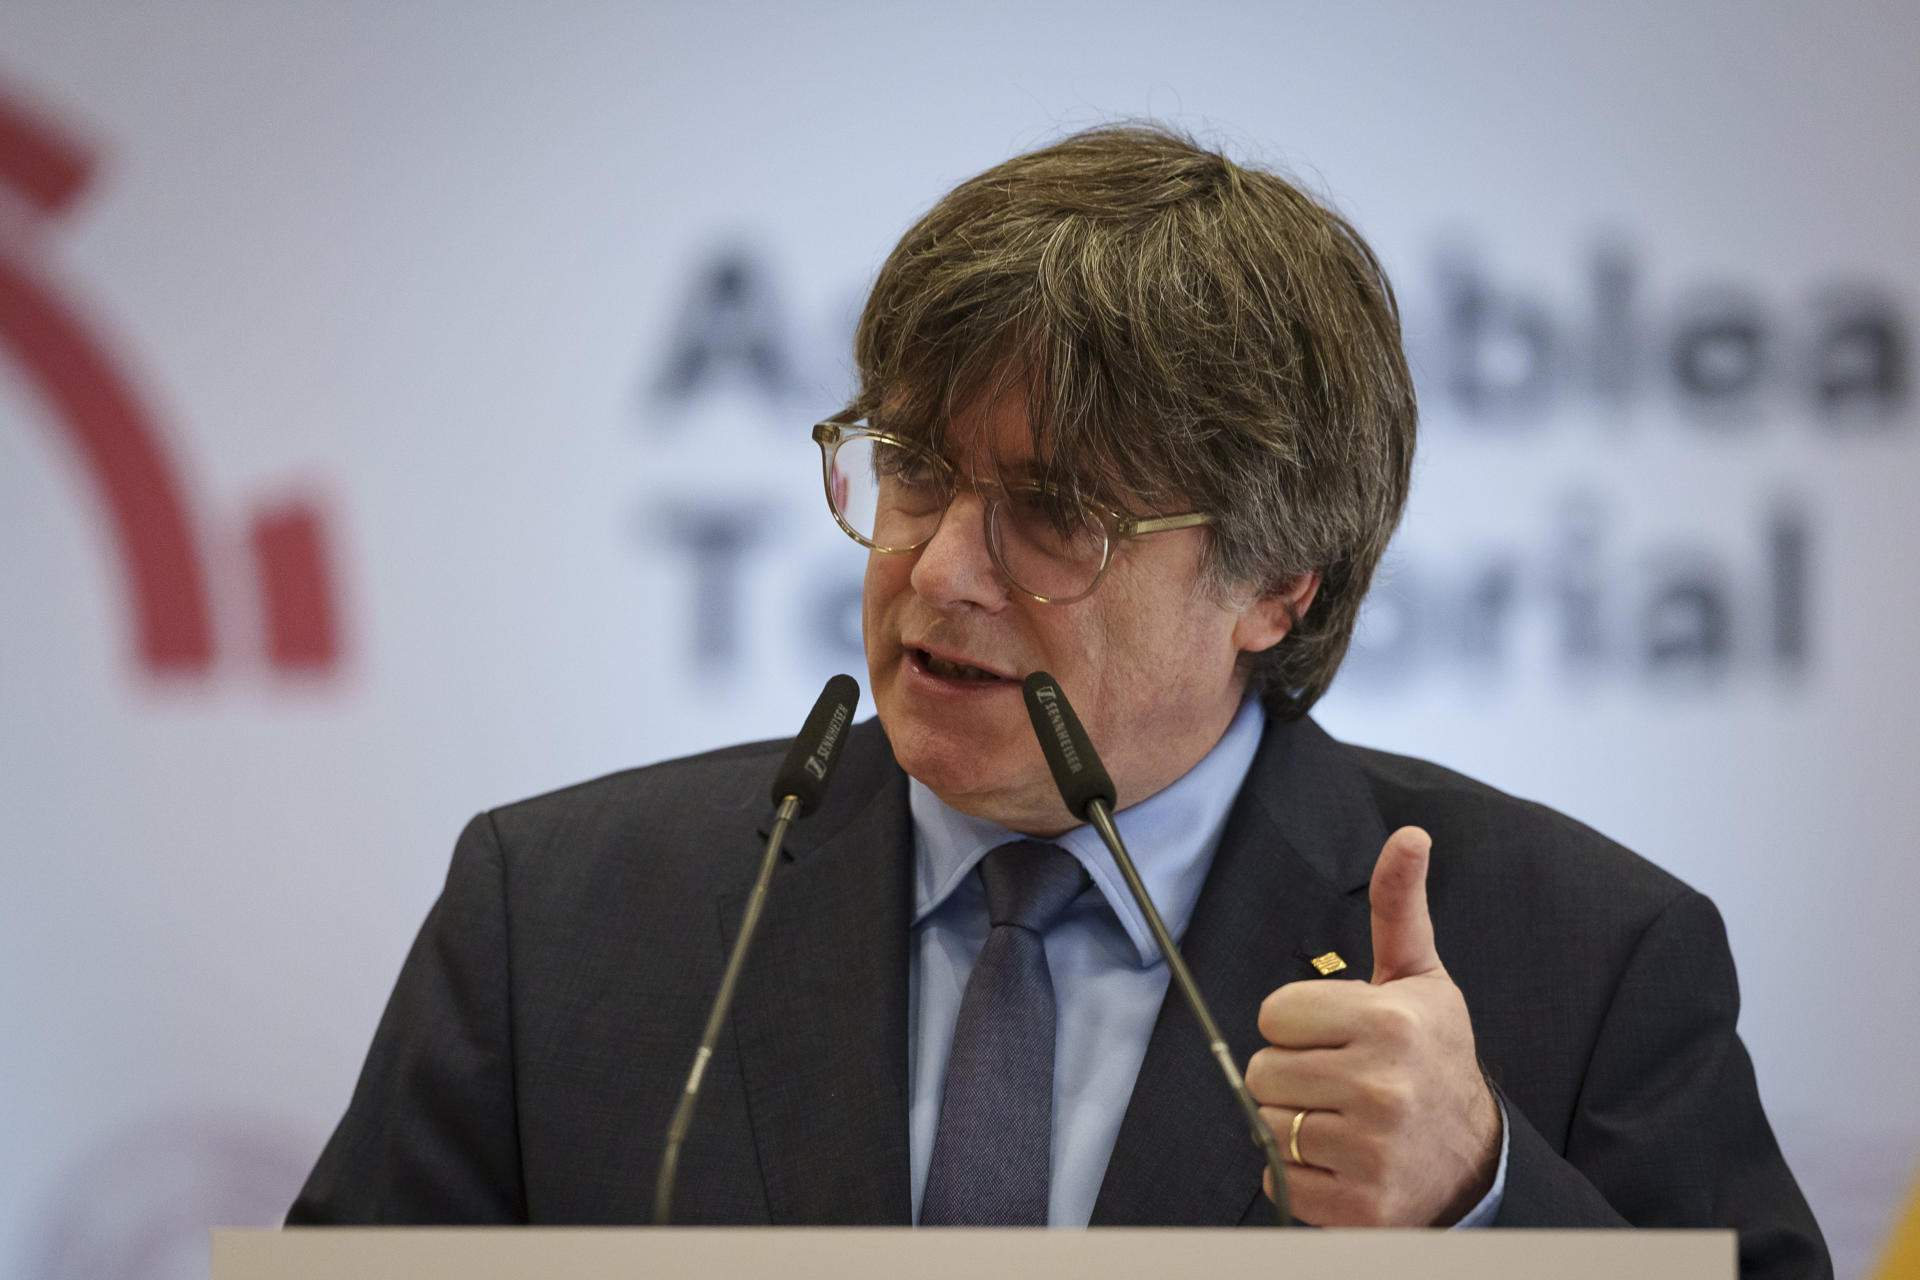 Here's why Puigdemont can return to Catalonia when the amnesty is passed, without awaiting a judge